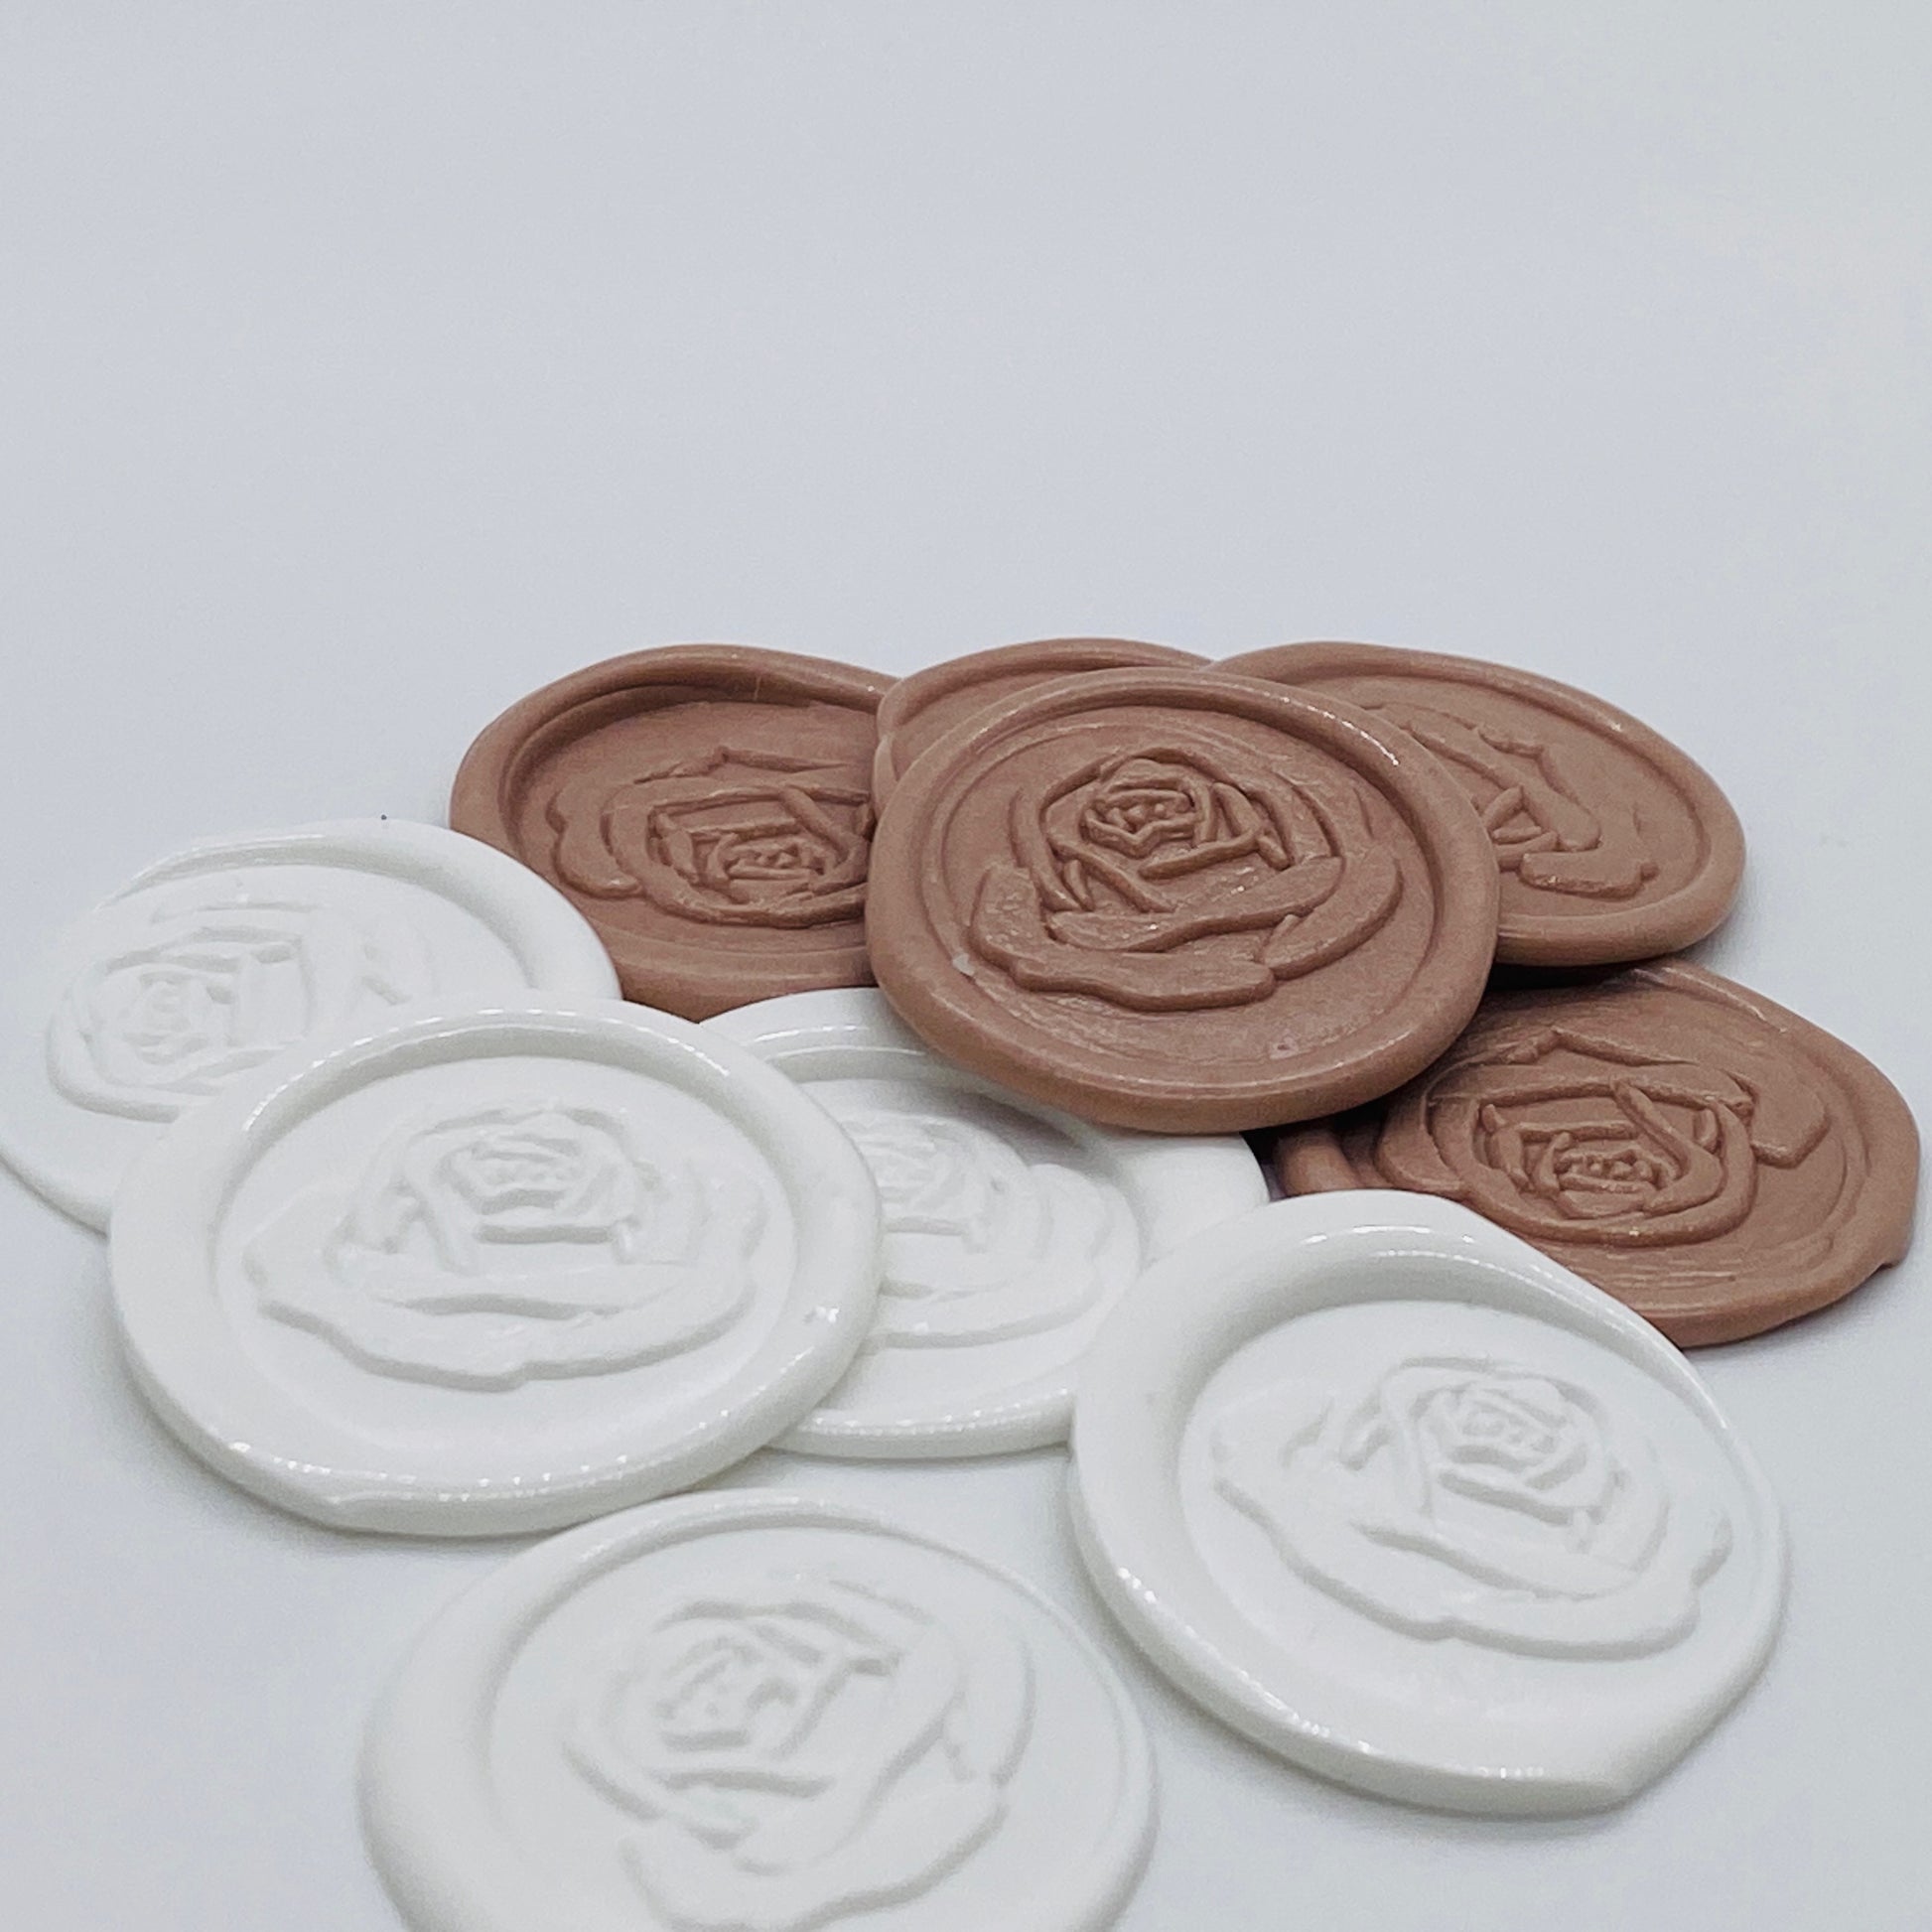 Wax Seals, Rose Wax Seal in White and Taupe, Pack of 10 - Gallery360 Designs